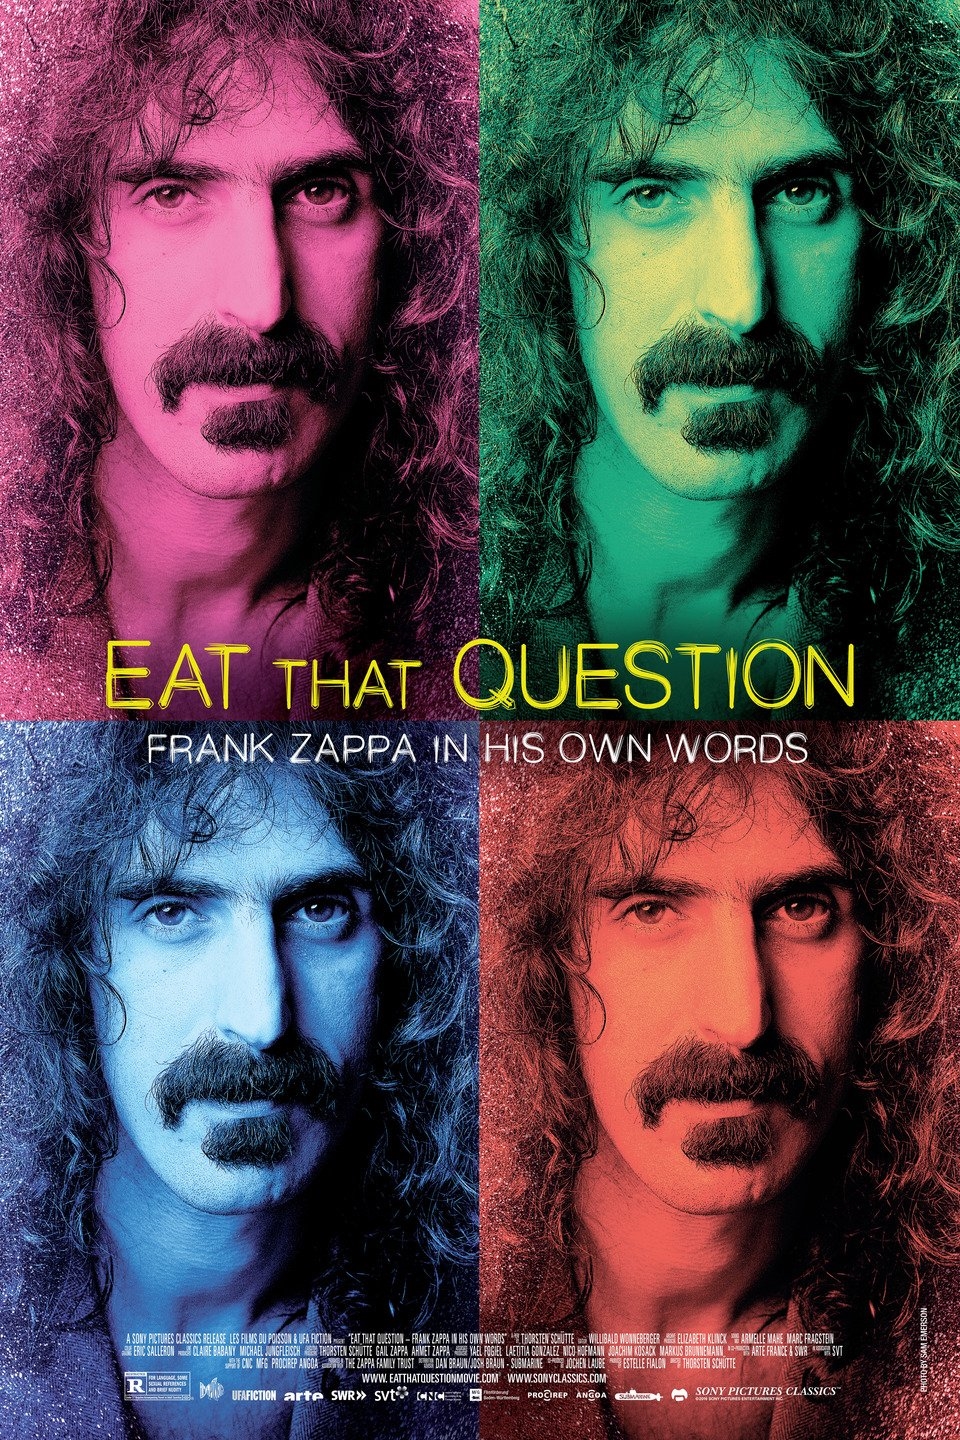 Eat That Question: Frank Zappa in His Own Words (2016) Screenshot 2